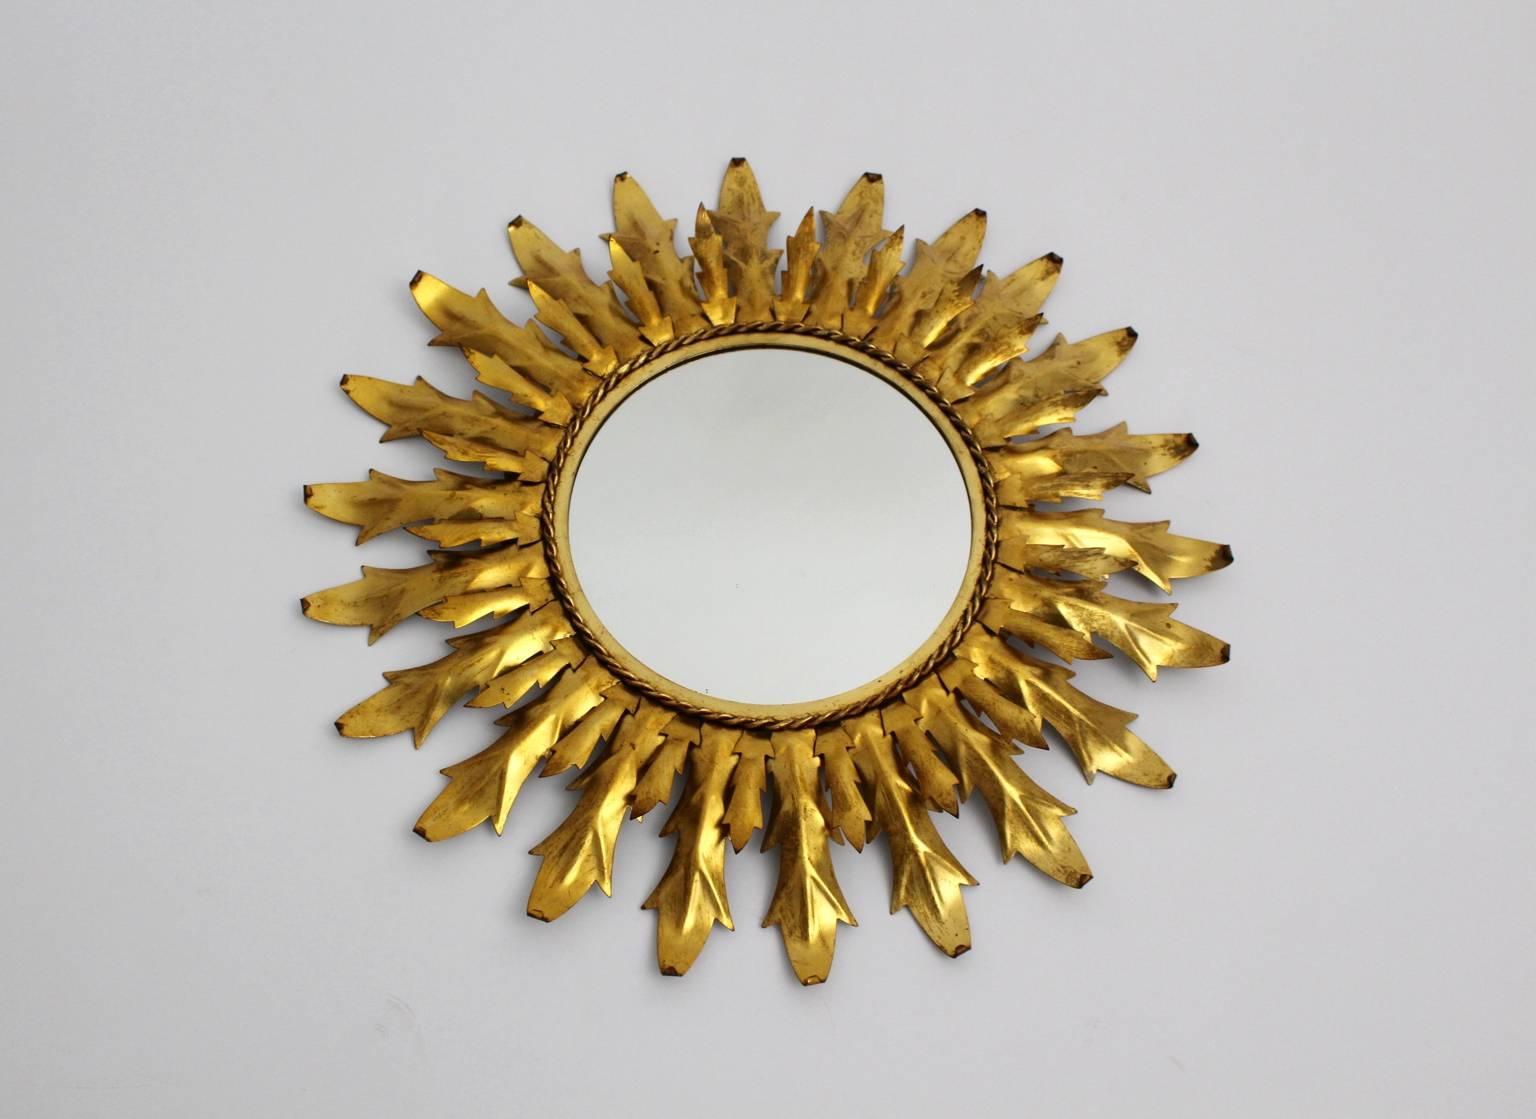 Mid Century Modern gilded metal sunburst mirror or wall mirror with curved leaves, which was made in Italy, circa 1960.
Diameter mirror 11.02 in. (28 cm).
Diameter 25.98 in (66 cm).
Depth 2.36 in (6cm).
 All measures are approximate.